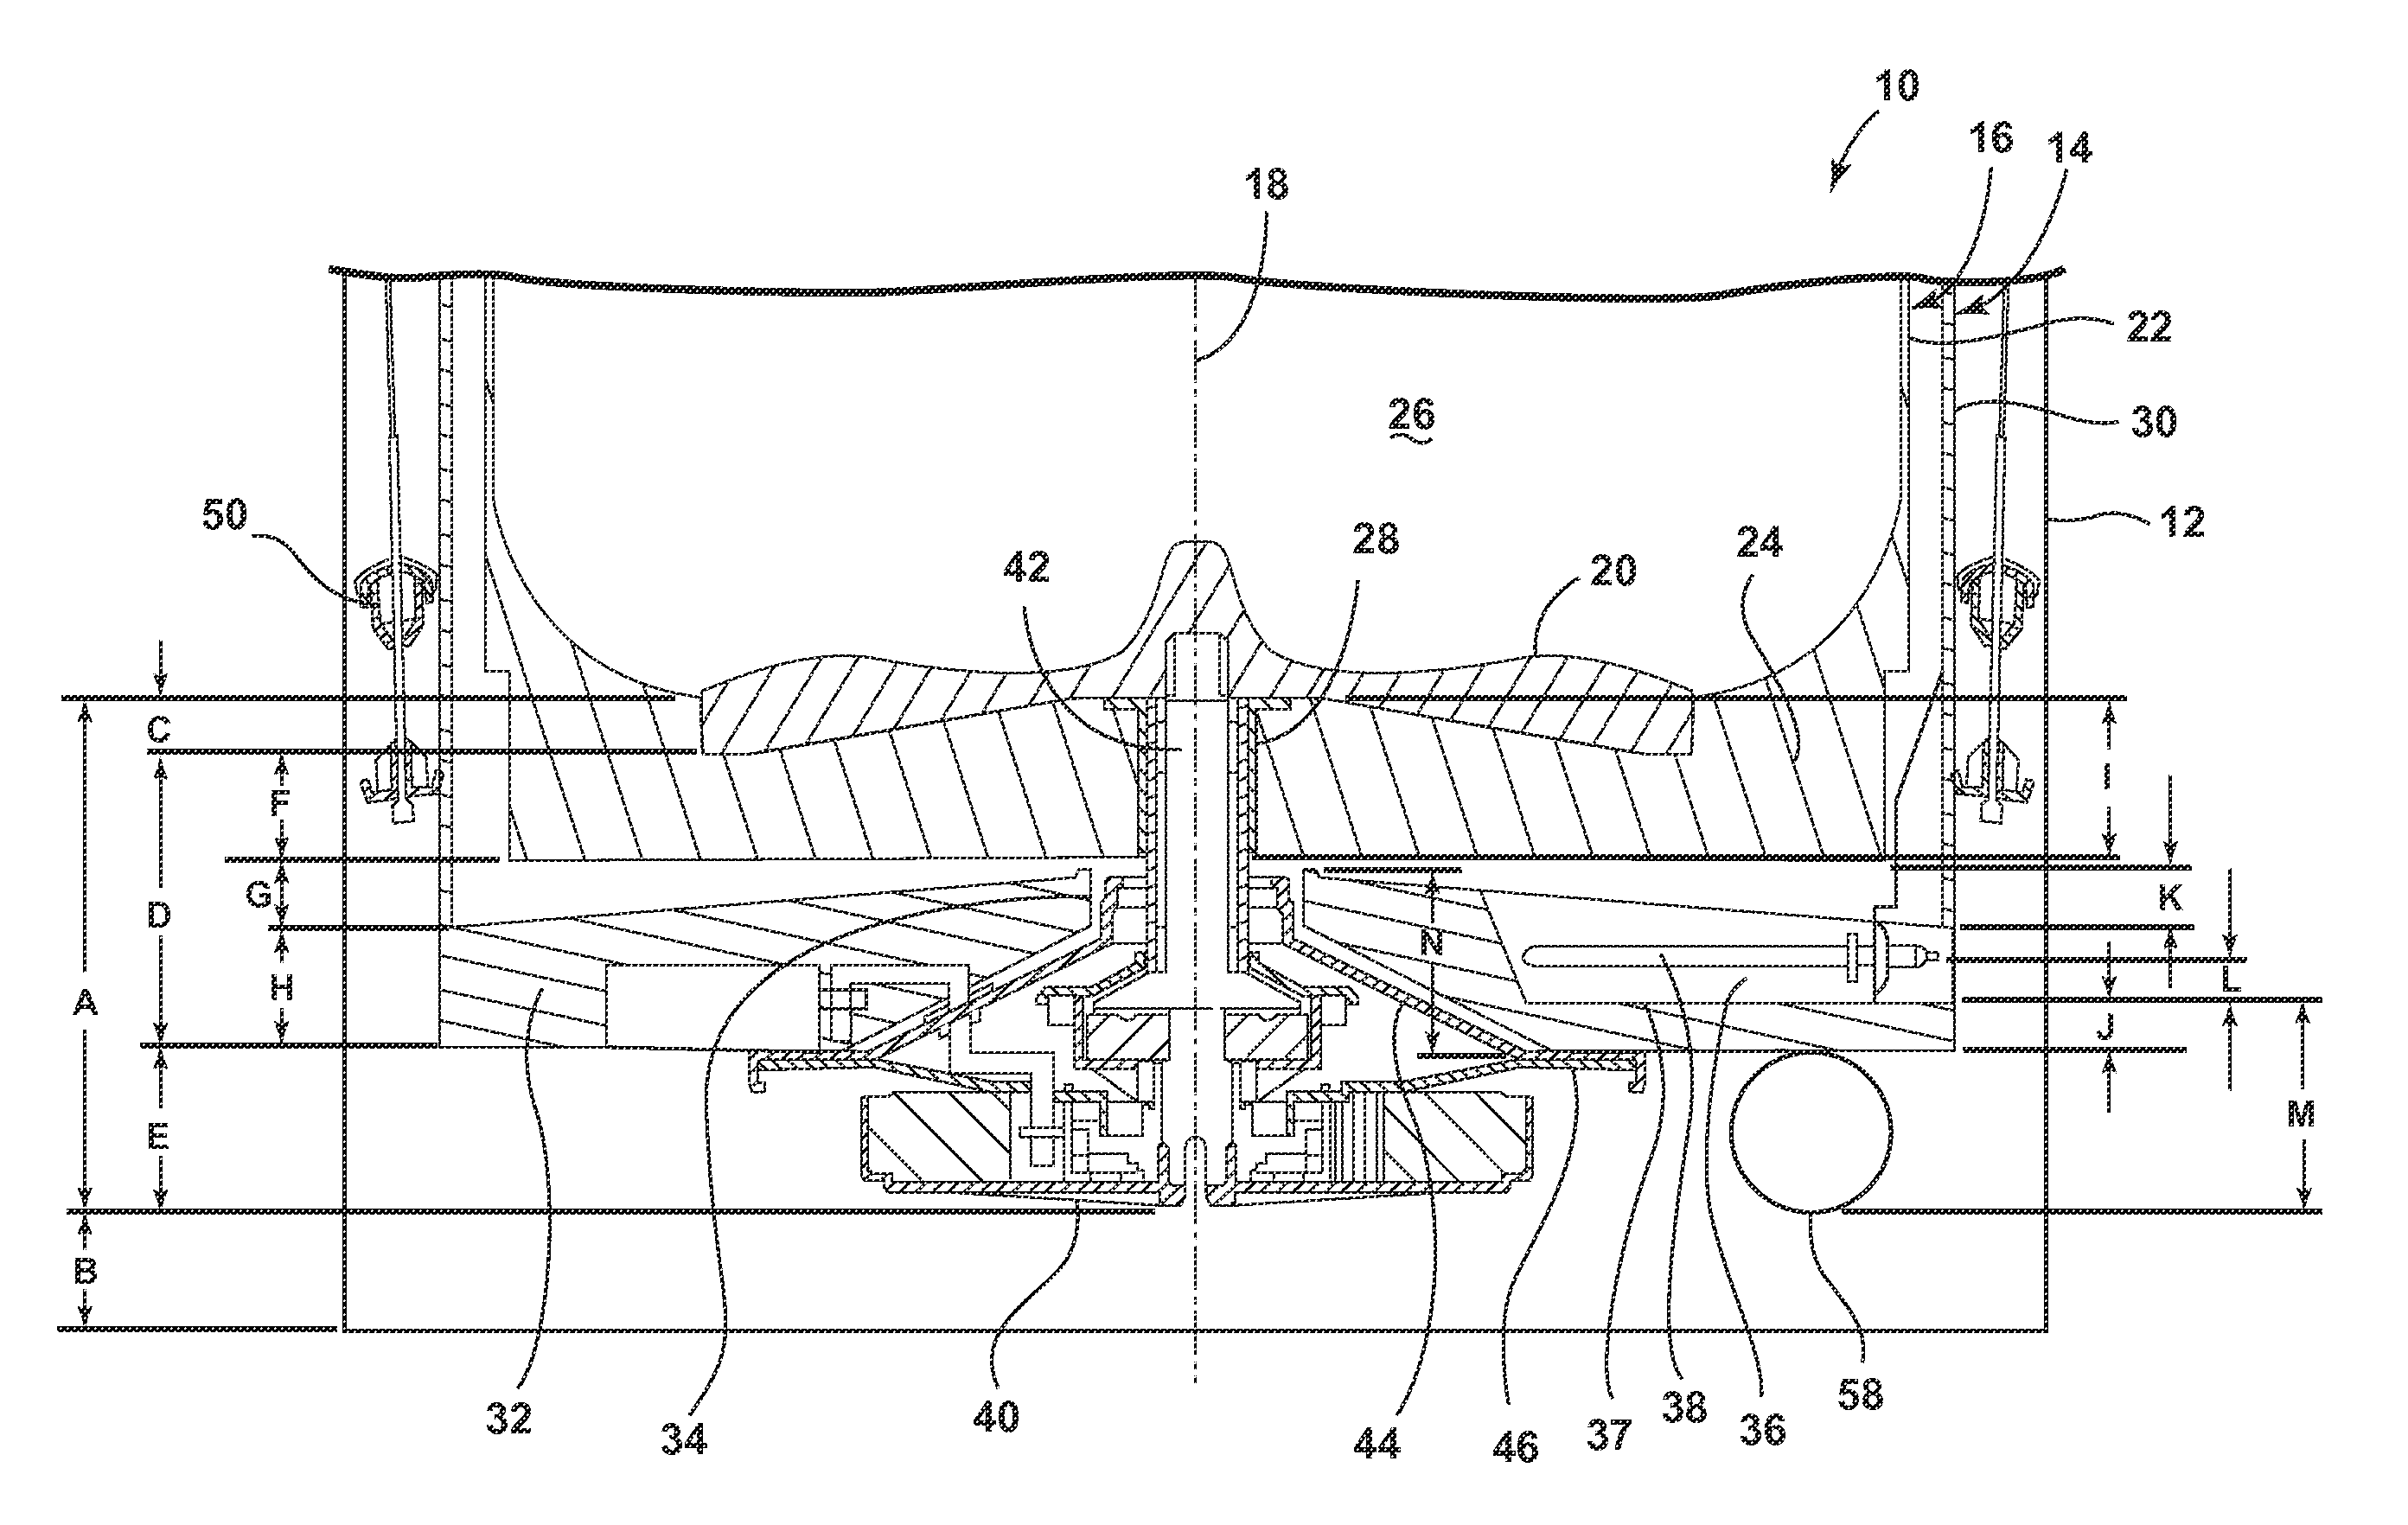 Laundry treating appliance with tub and basket having matched characteristics